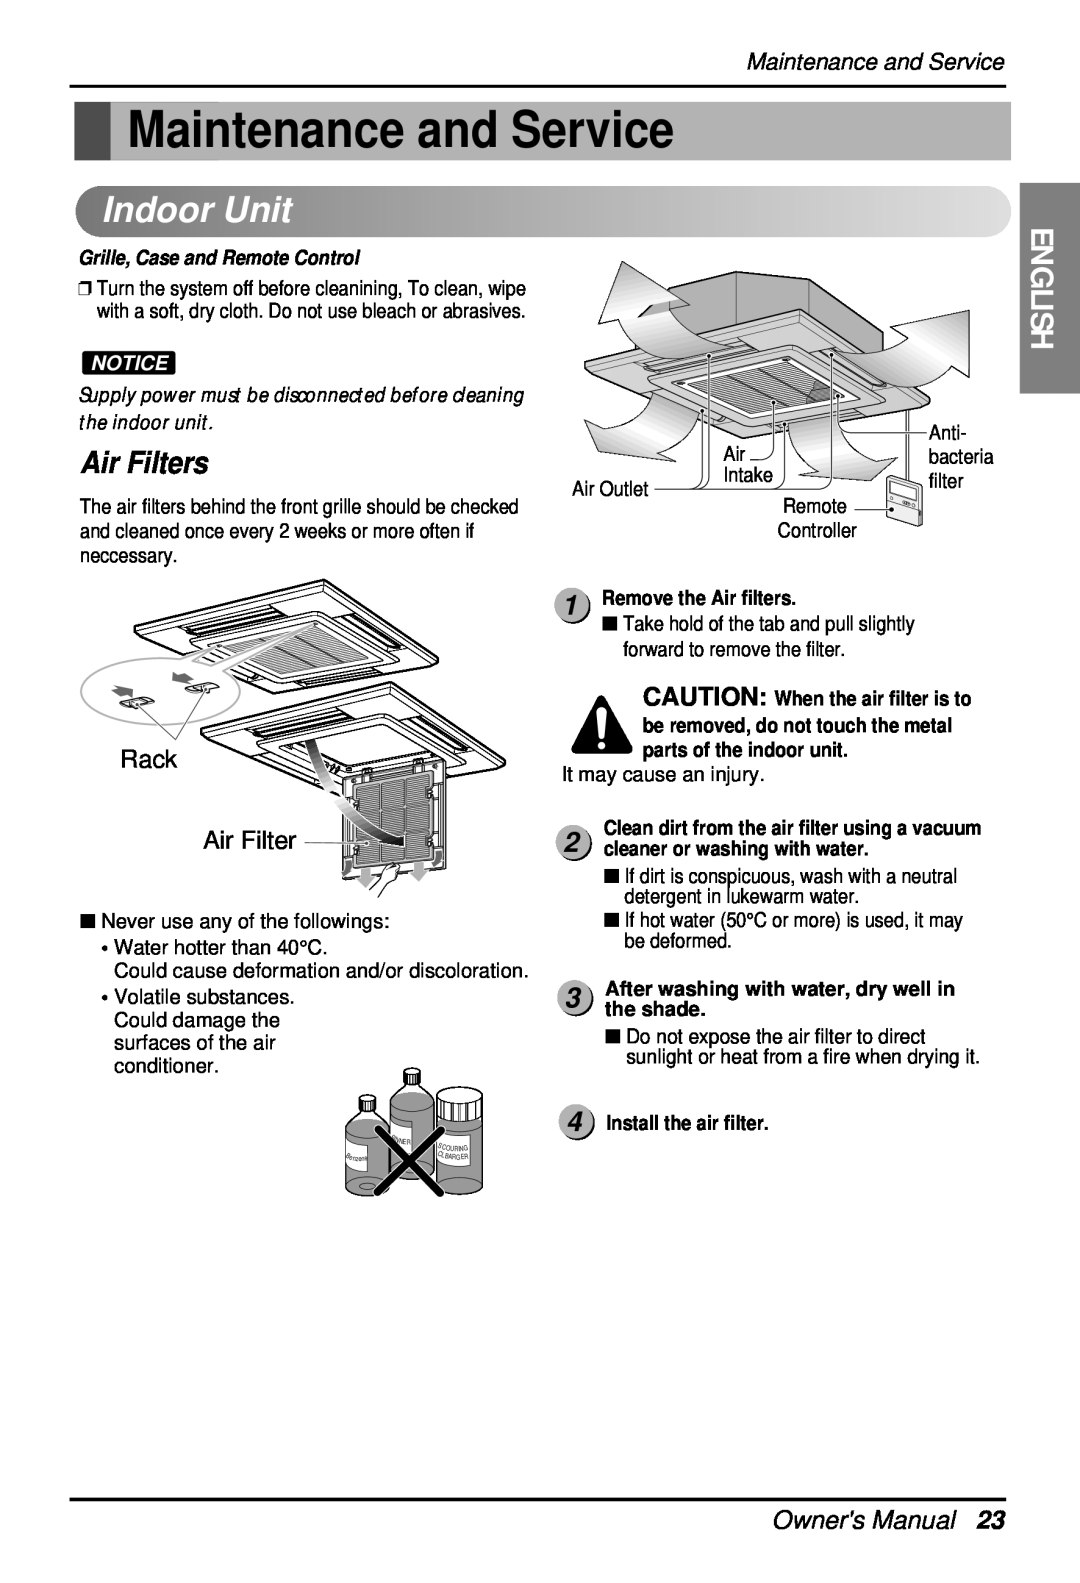 LG Electronics 3828A22005P owner manual Maintenance and Service, Air Filters, Rack Air Filter, IndoorUnit, Owners Manual 